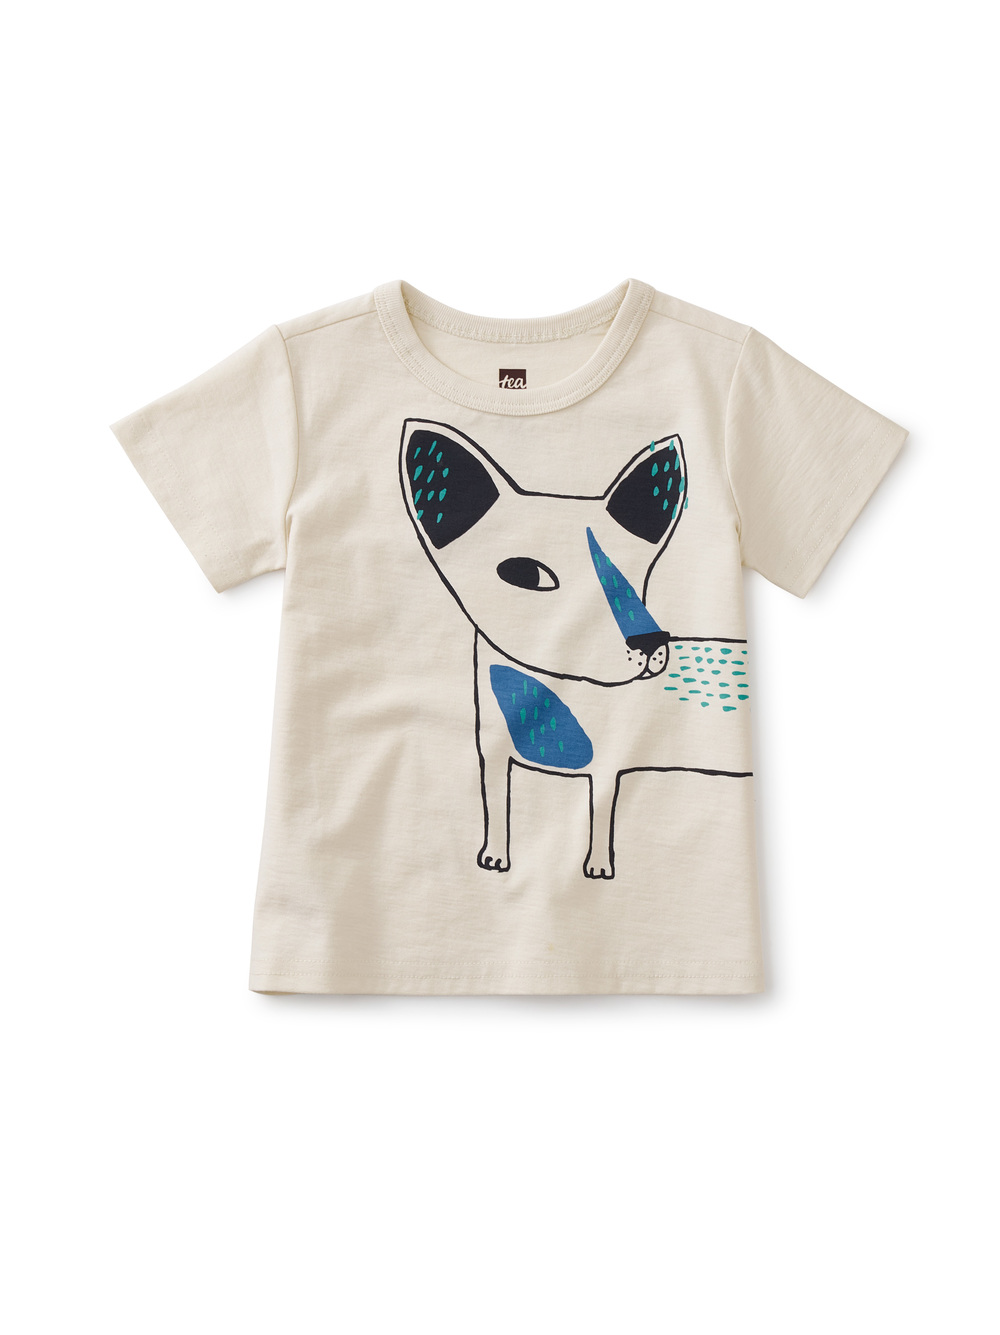 Dog & Rooster Baby Graphic Tee